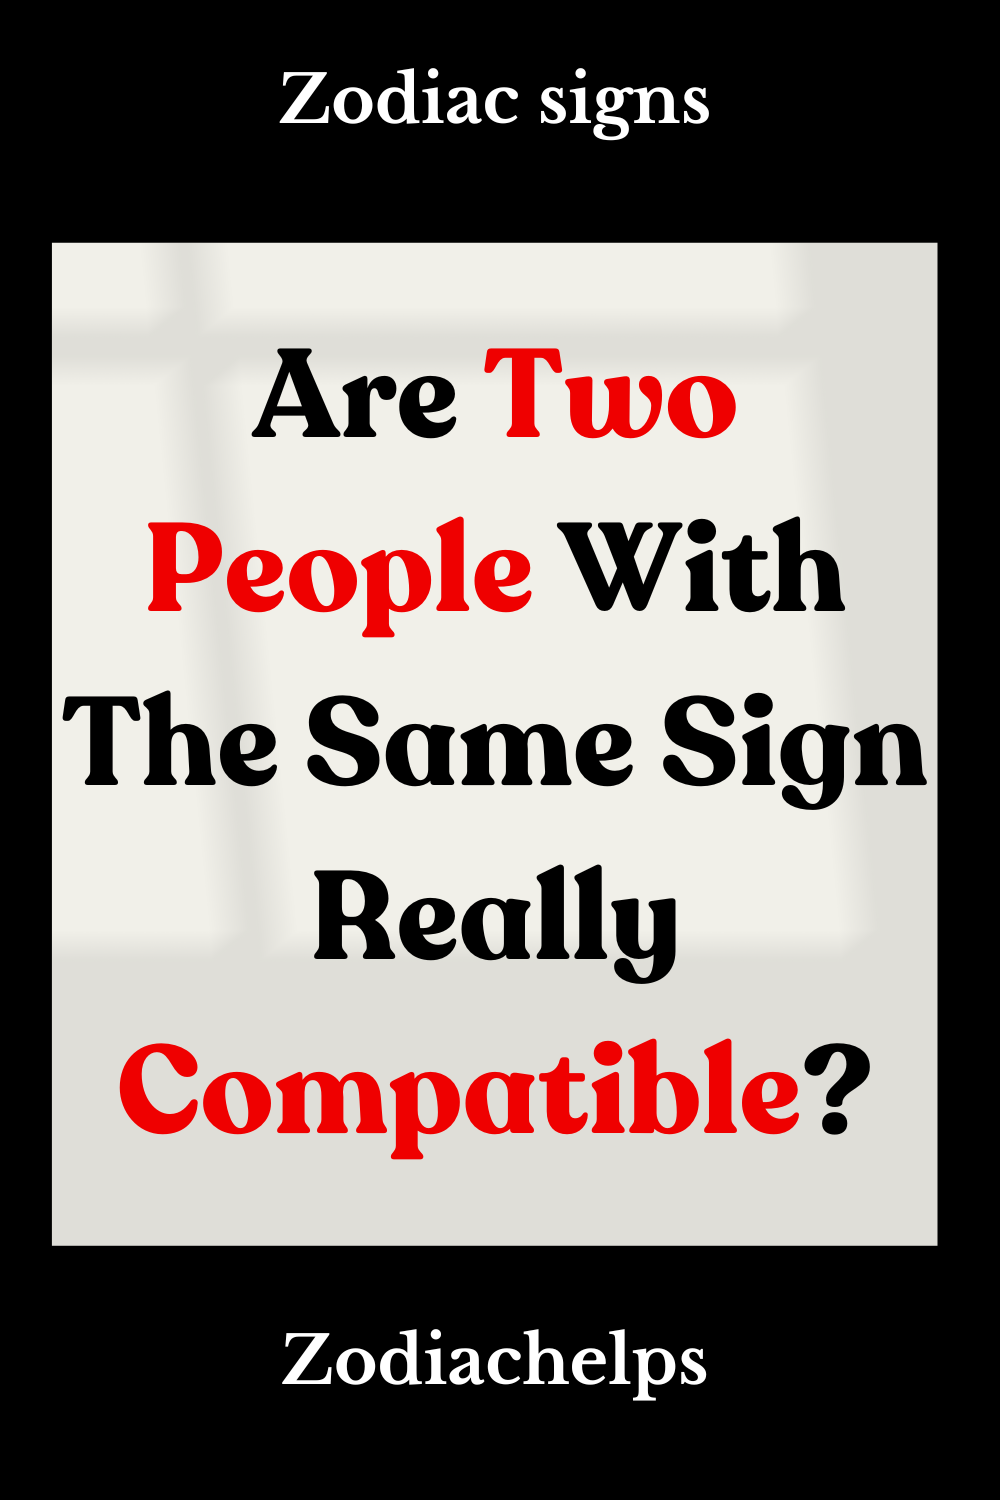 Are Two People With The Same Sign Really Compatible?